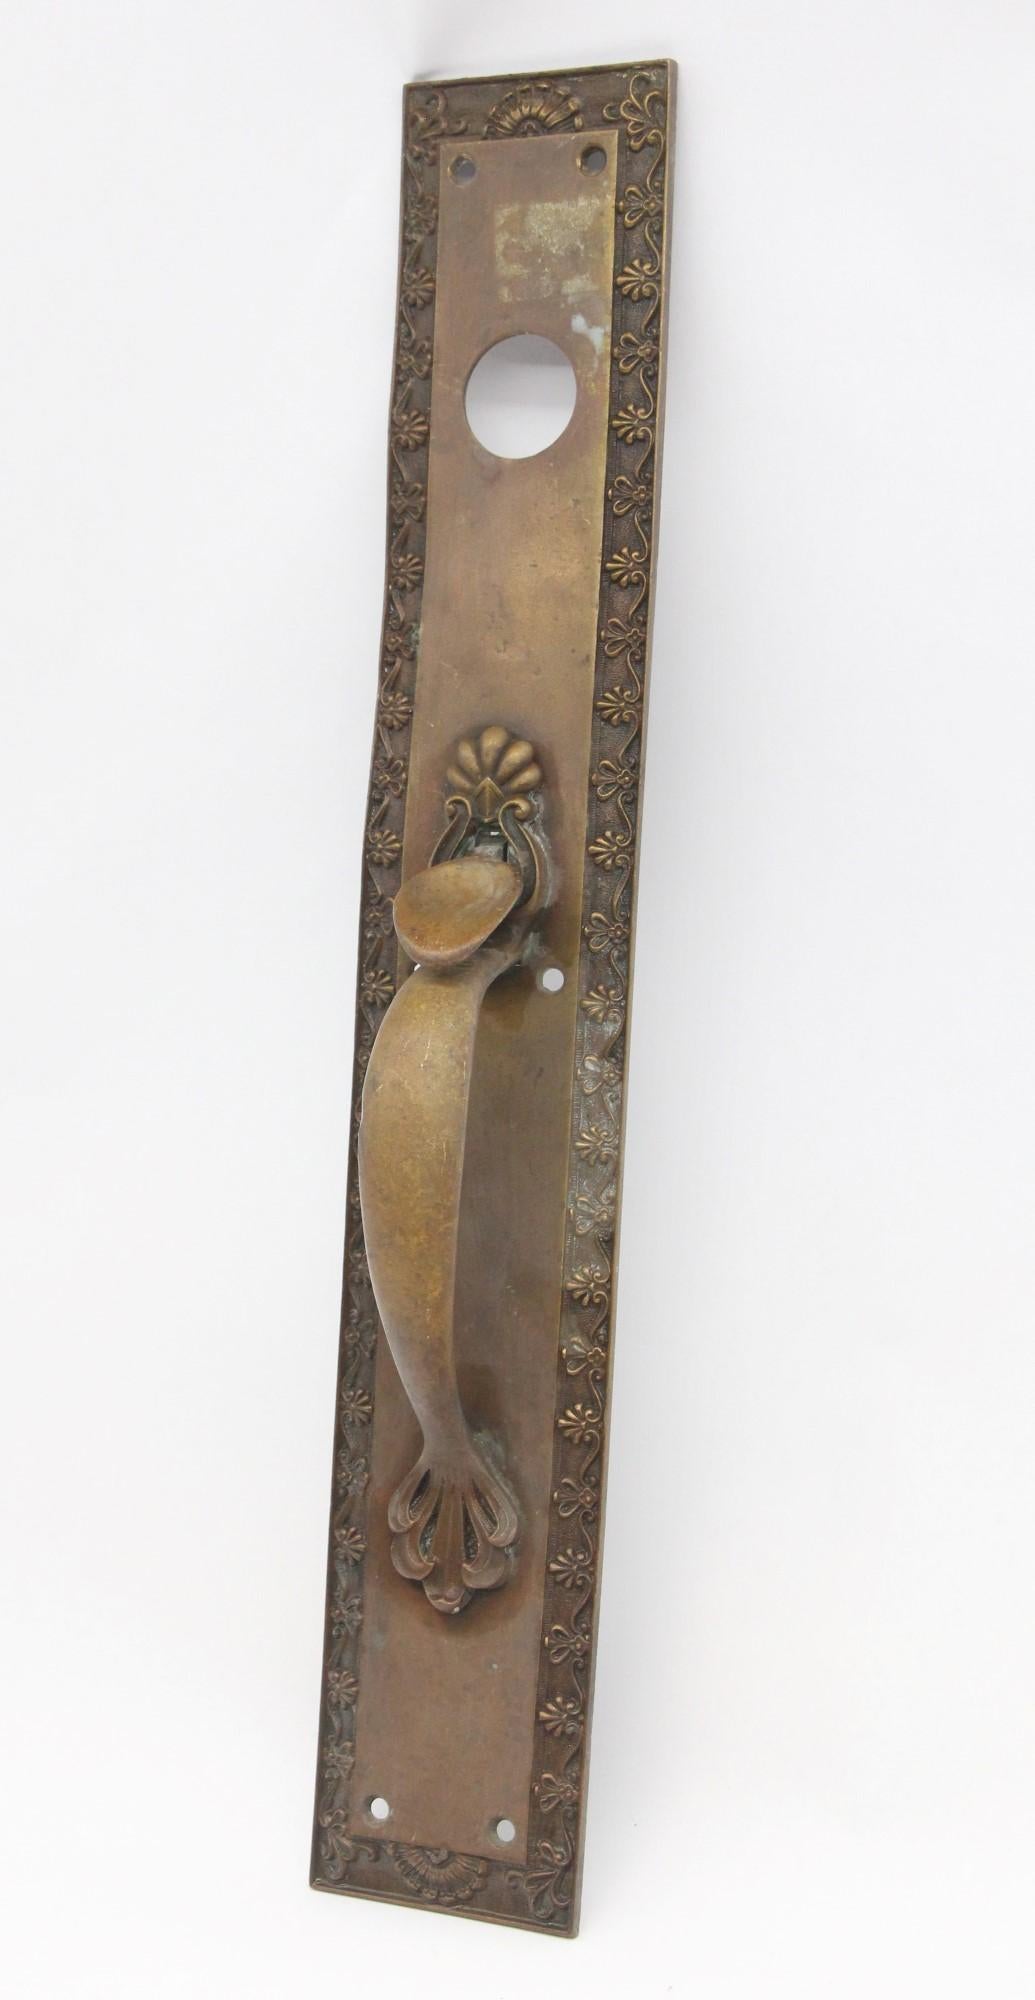 20th Century Neoclassical style bronze door pull featuring a flower and shell design. This piece includes a thumb latch and lock insert. Please note the plate is slightly bent. One available. This can be seen at our 400 Gilligan St location in